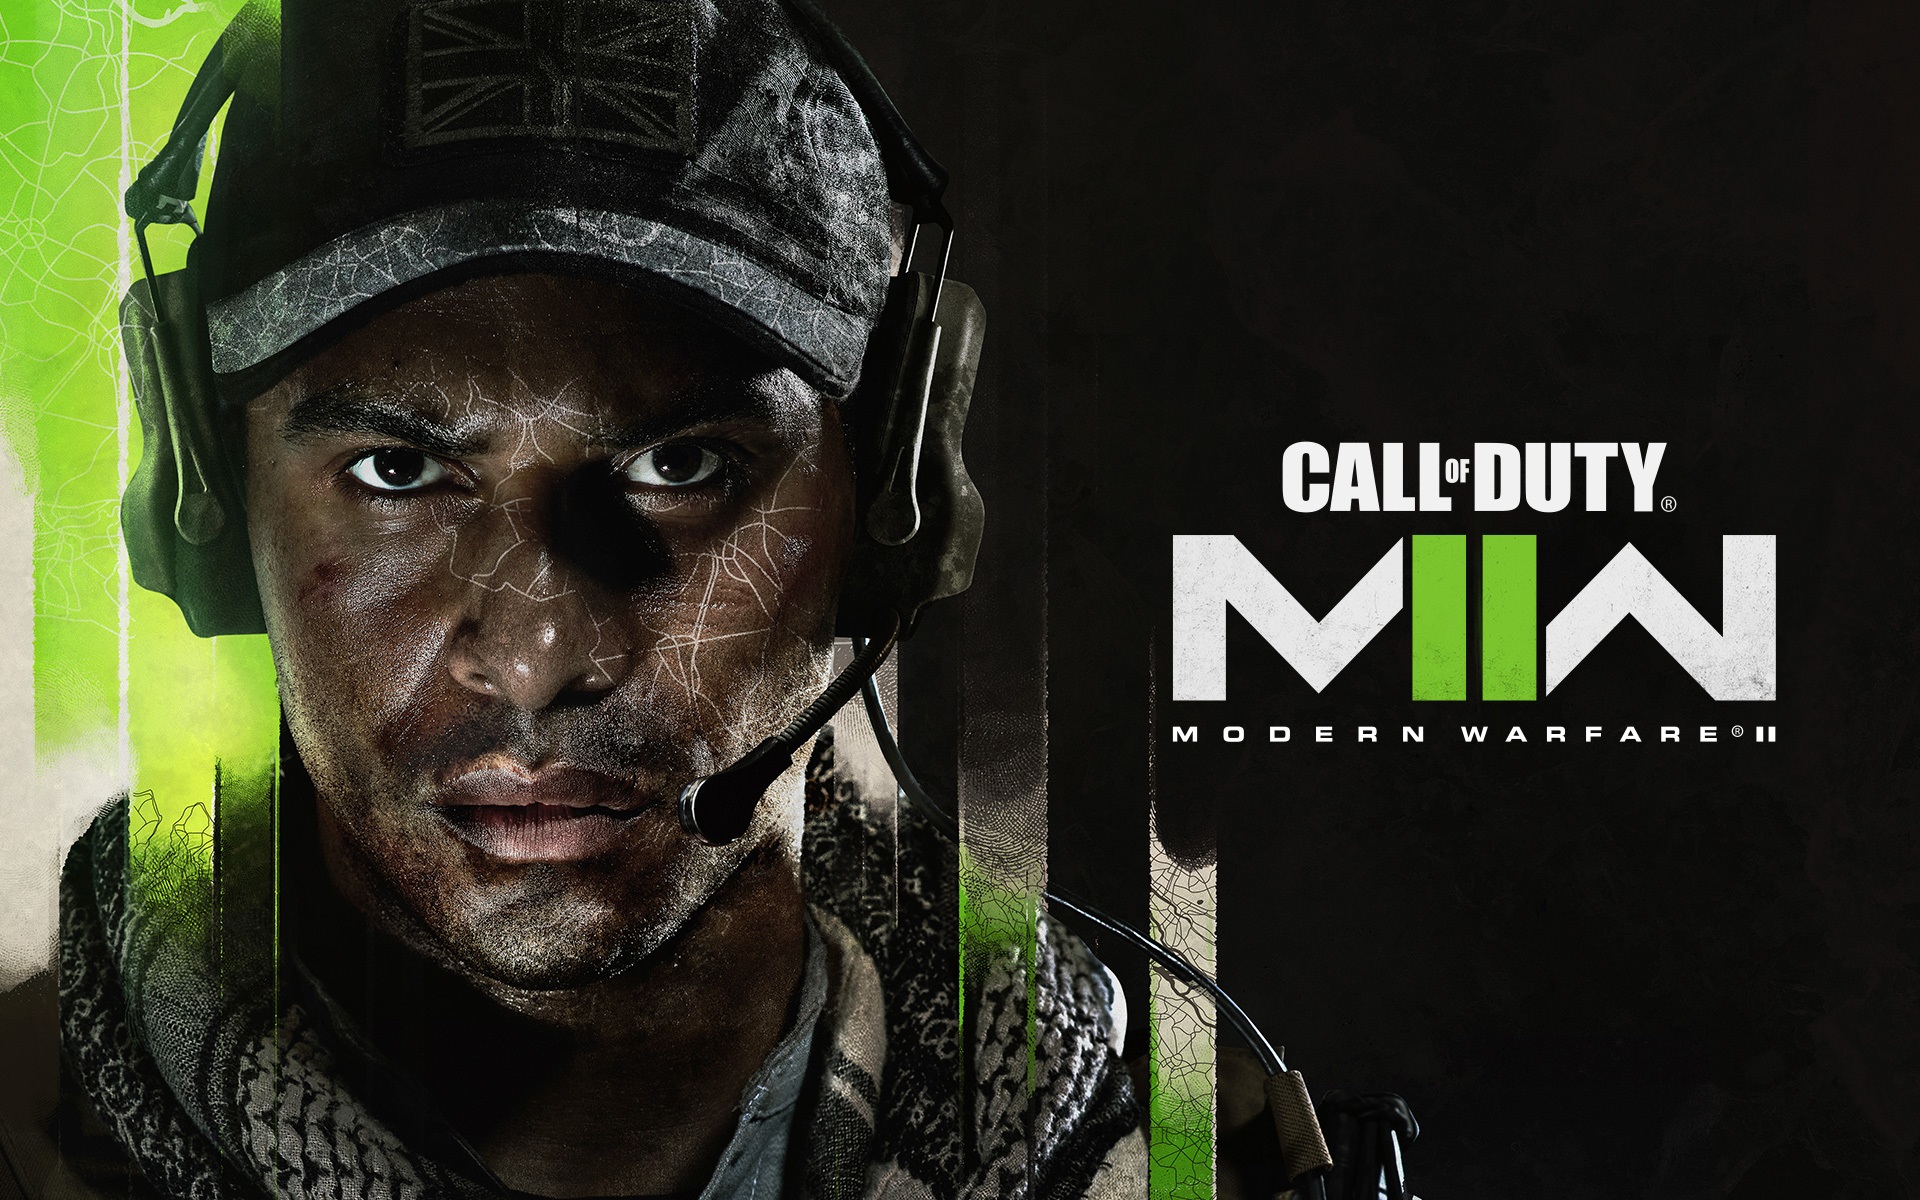 call-of-duty-modern-warfare-2-release-date-and-starring-characters